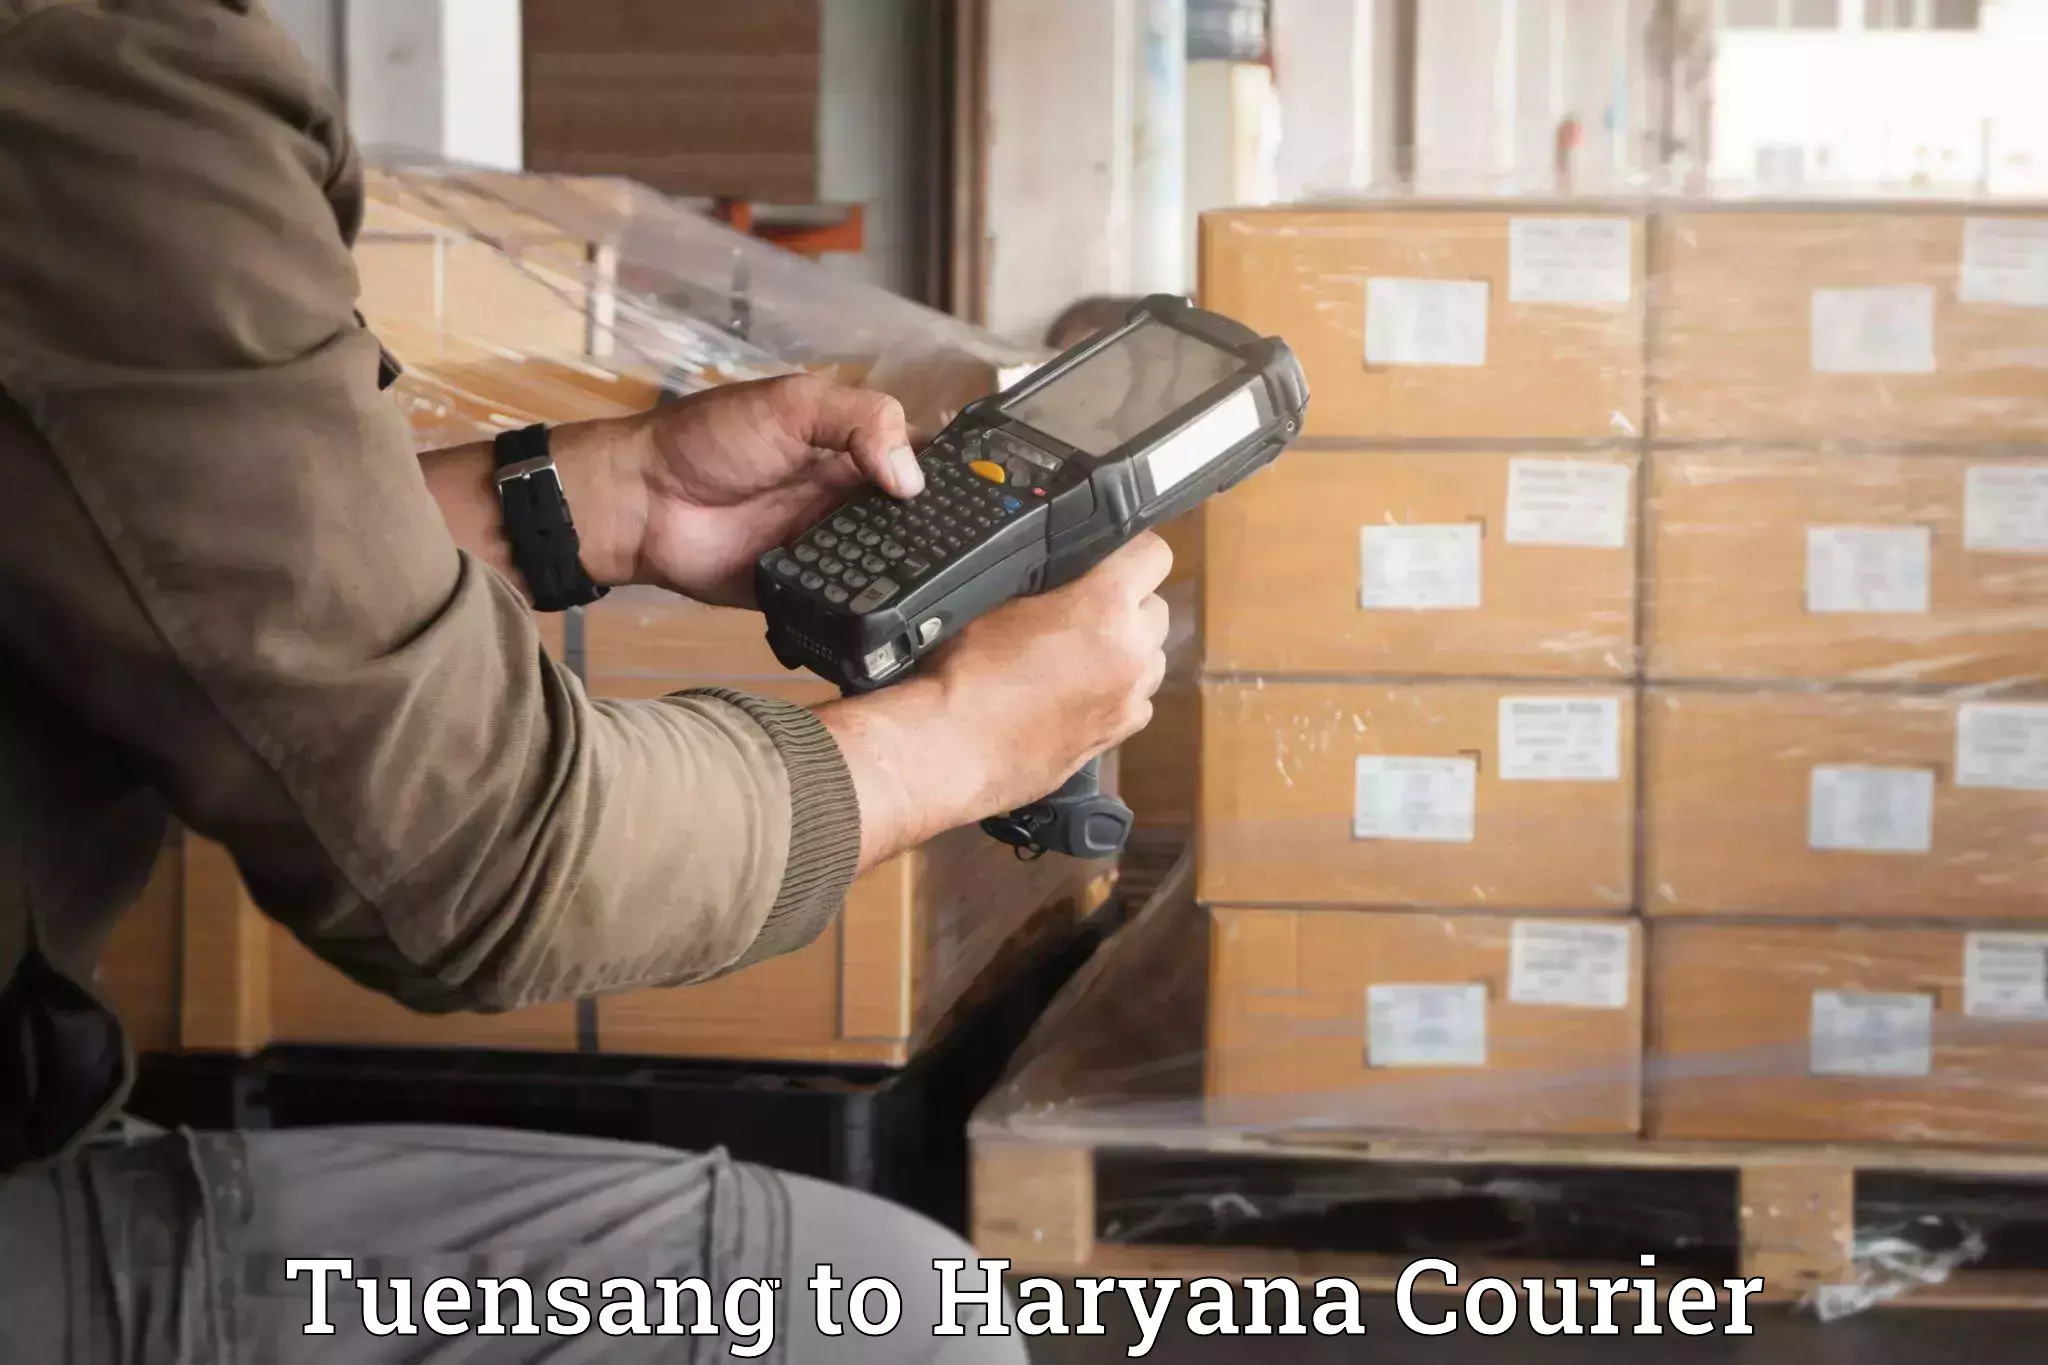 Furniture transport specialists Tuensang to Haryana